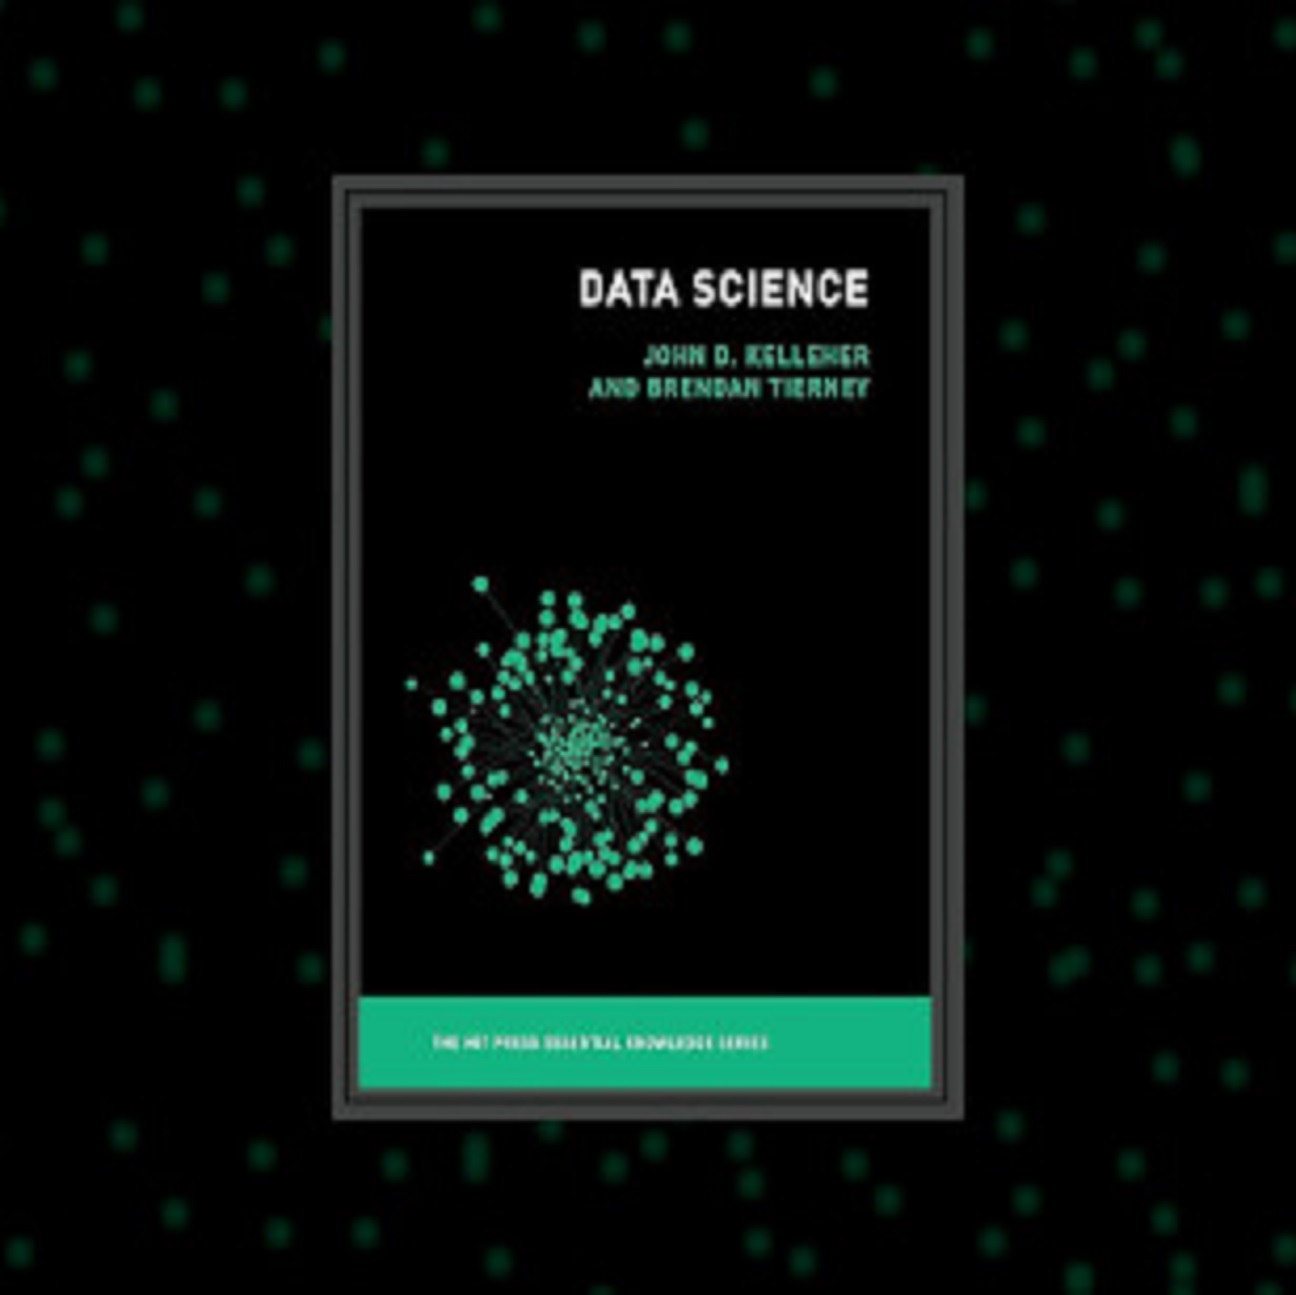 Image for Publication: Data Science - John Kelleher and Brendan Tierney